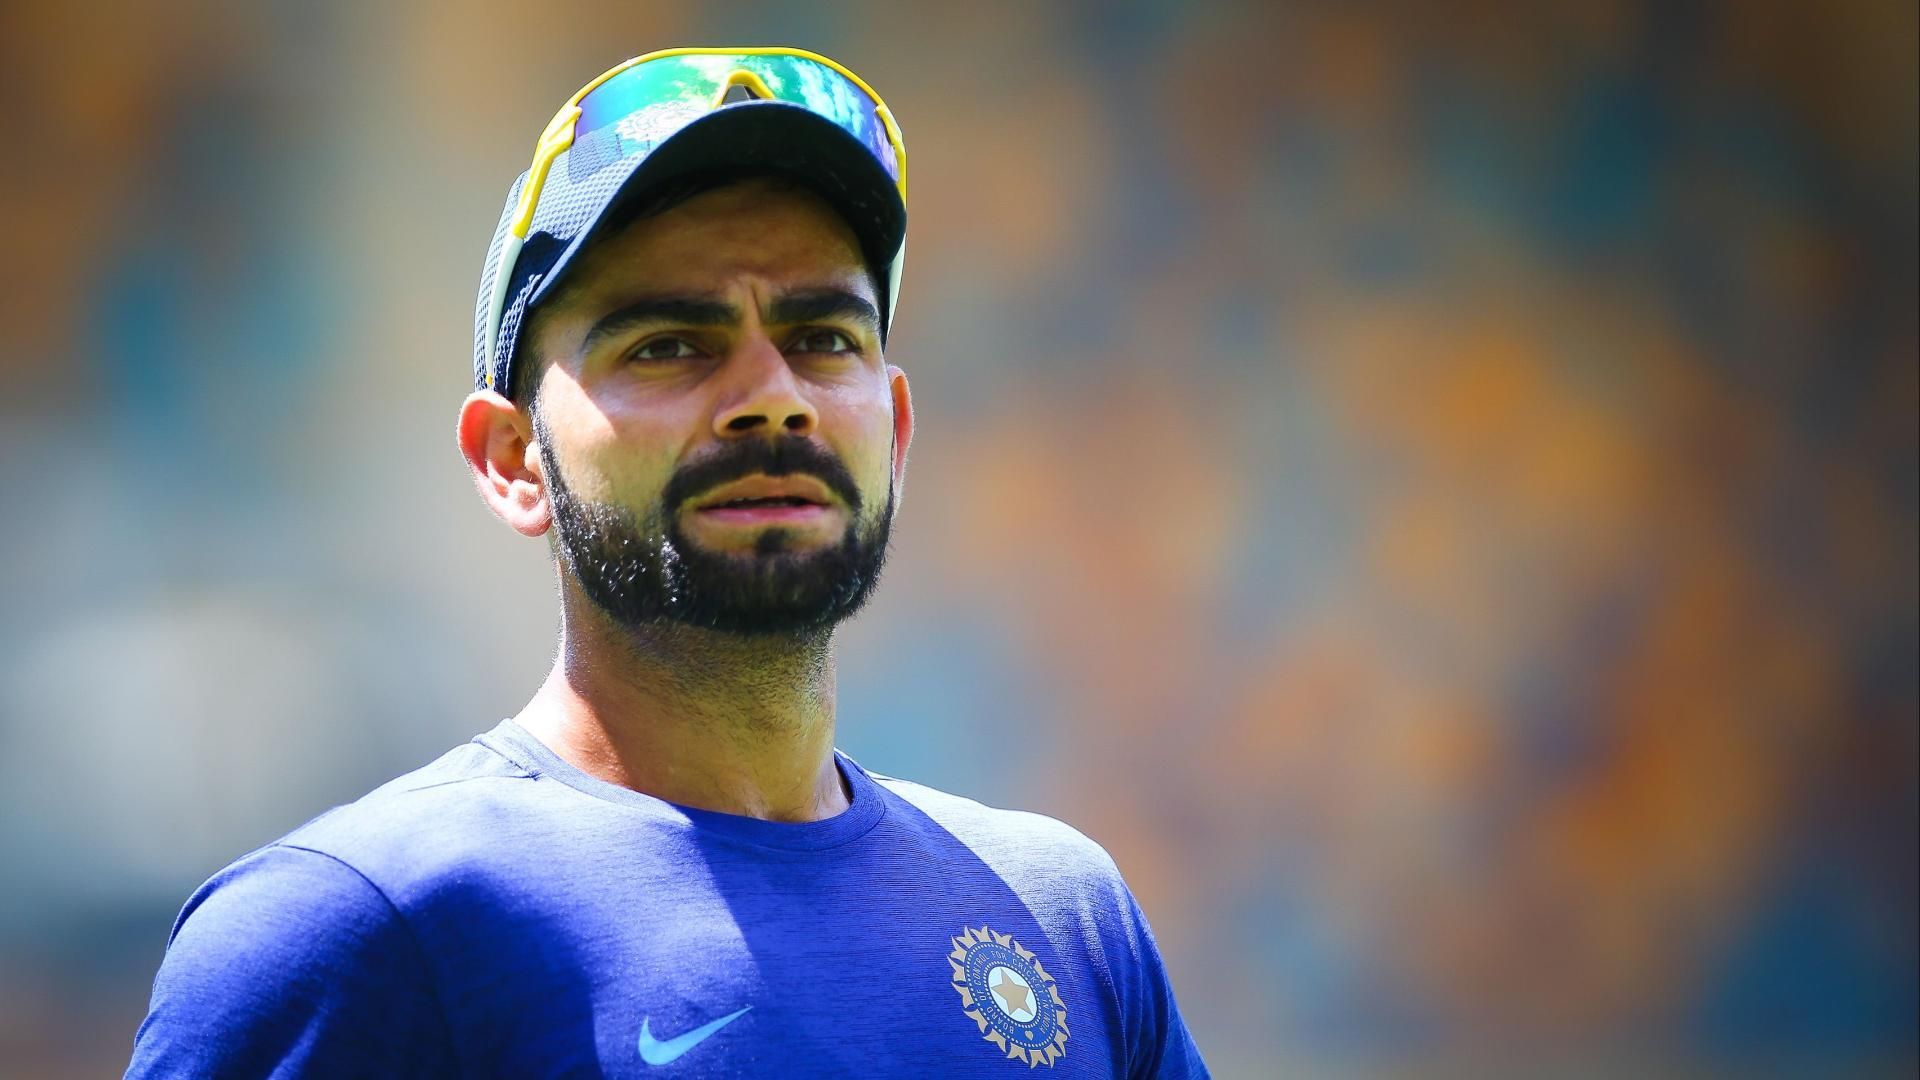 Quotes By Virat Kohli That Will Definitely Inspire You To Strive For Greatness